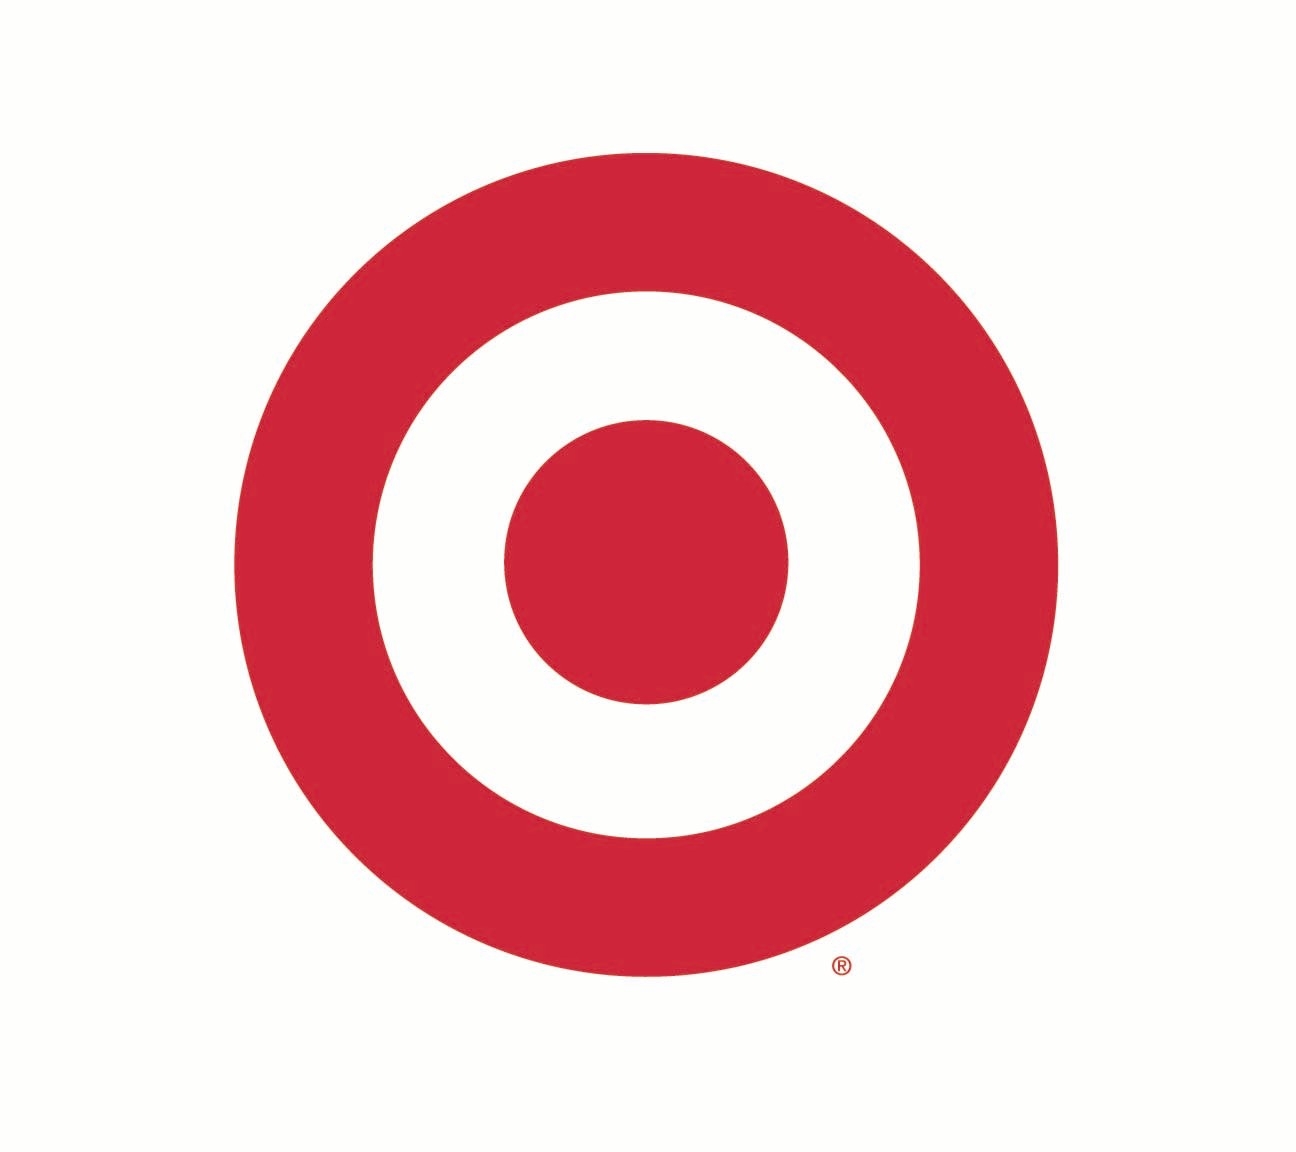 Free cliparts download clip. Bullseye clipart symbol target